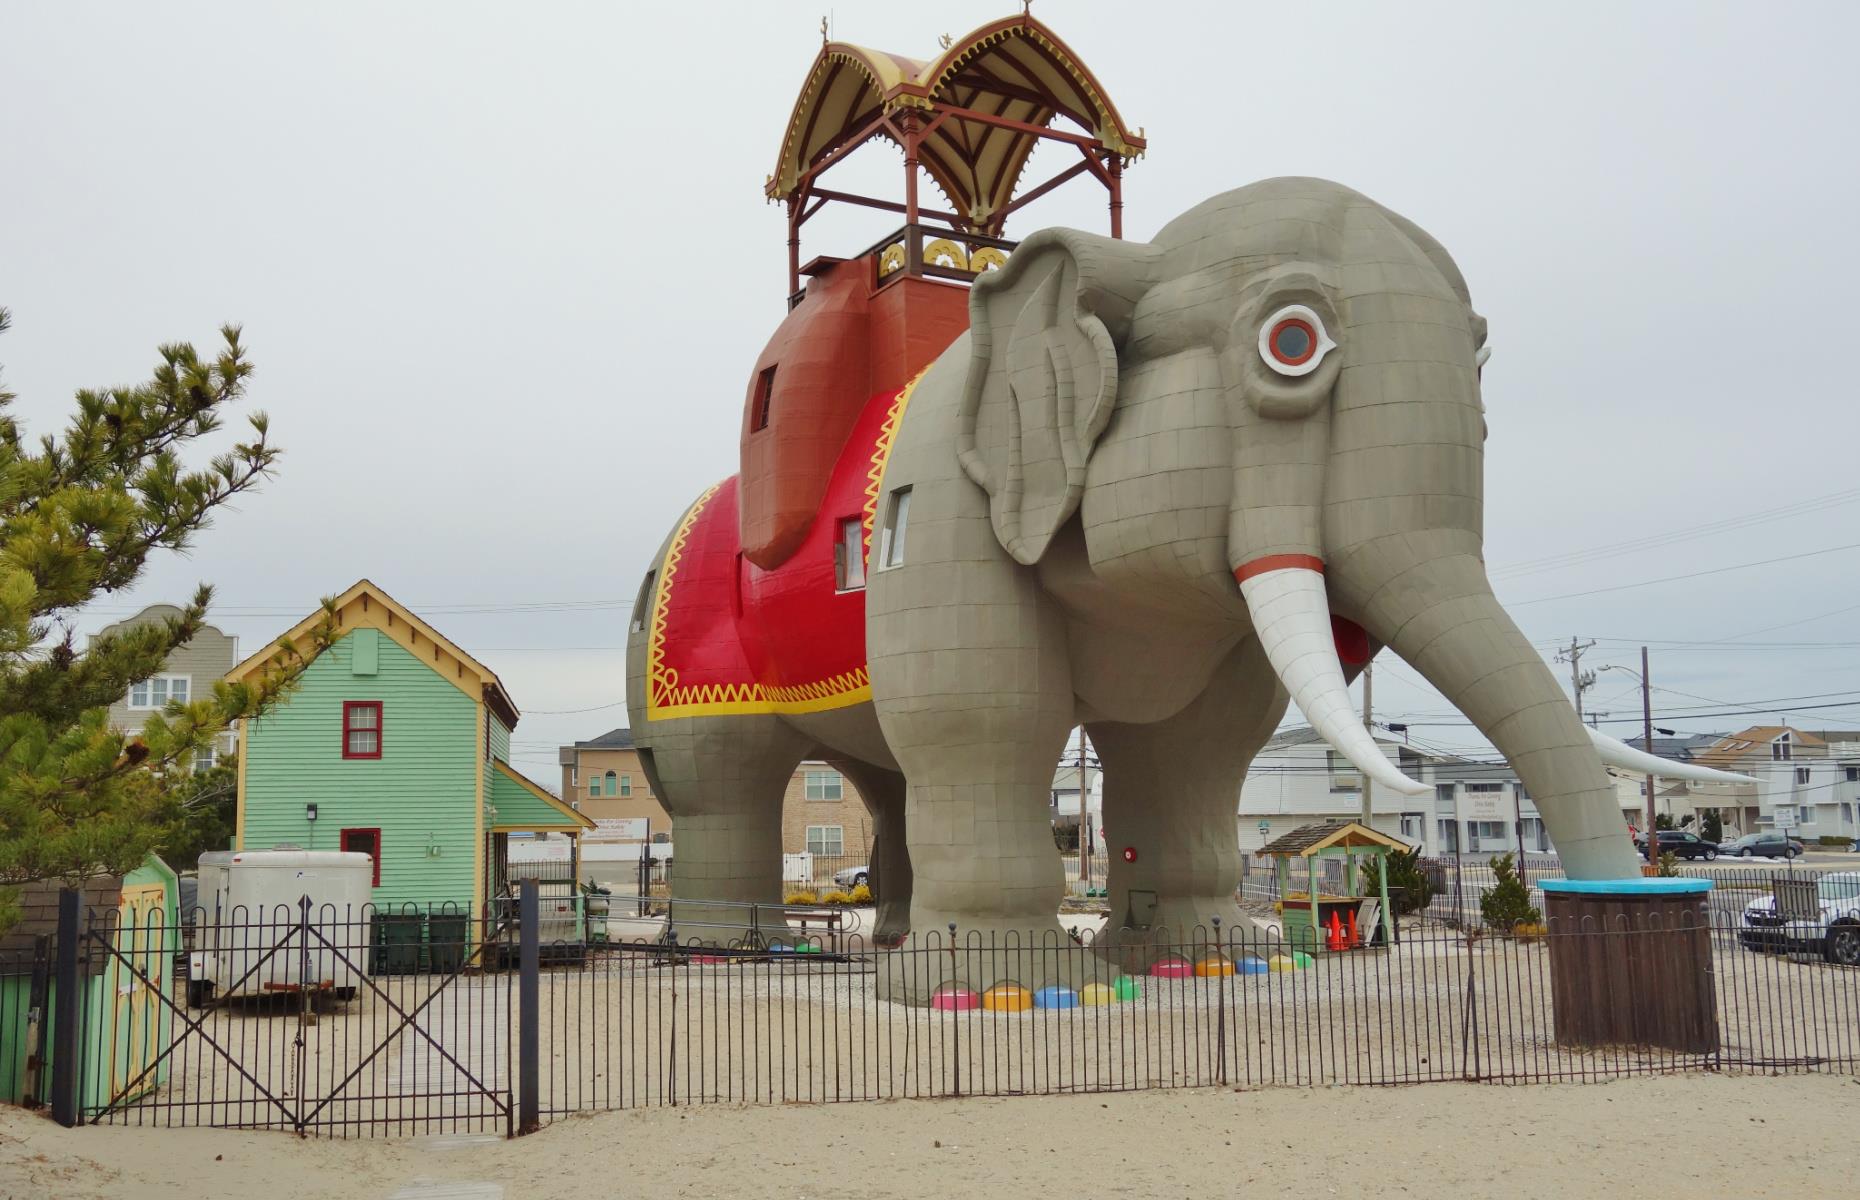 <p>Perhaps the most whimsical listing on the National Register, <a href="https://lucytheelephant.org/">Lucy the Elephant</a> is a six-story elephant-shaped building that has sat just southwest of Atlantic City since the 1880s. She was built as a tourist attraction and still is one today, but over the years the structure has also been used as office space, a restaurant and a tavern. The elephant was almost torn down in the 1960s, but locals realized her historic value and fought to have her saved and restored.</p>  <p><a href="https://www.loveexploring.com/galleries/65669/unusual-things-youll-find-on-a-road-trip-through-the-usa?page=1"><strong>Now check out more unusual things you'll find on a road trip through the USA</strong></a></p>